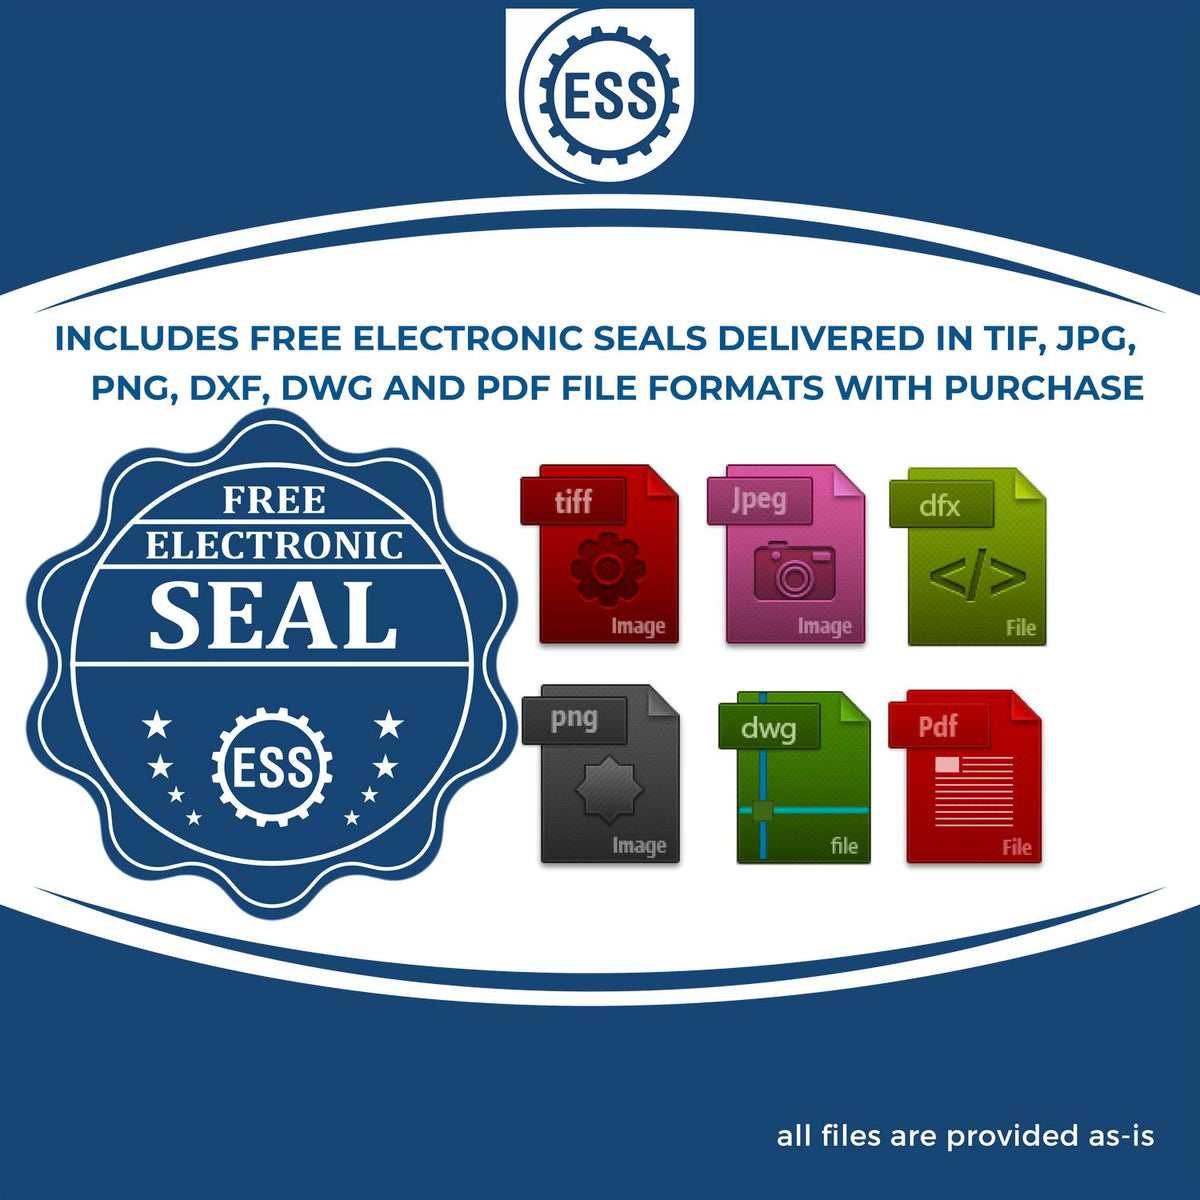 An infographic for the free electronic seal for the Premium MaxLight Pre-Inked Alaska Landscape Architectural Stamp illustrating the different file type icons such as DXF, DWG, TIF, JPG and PNG.